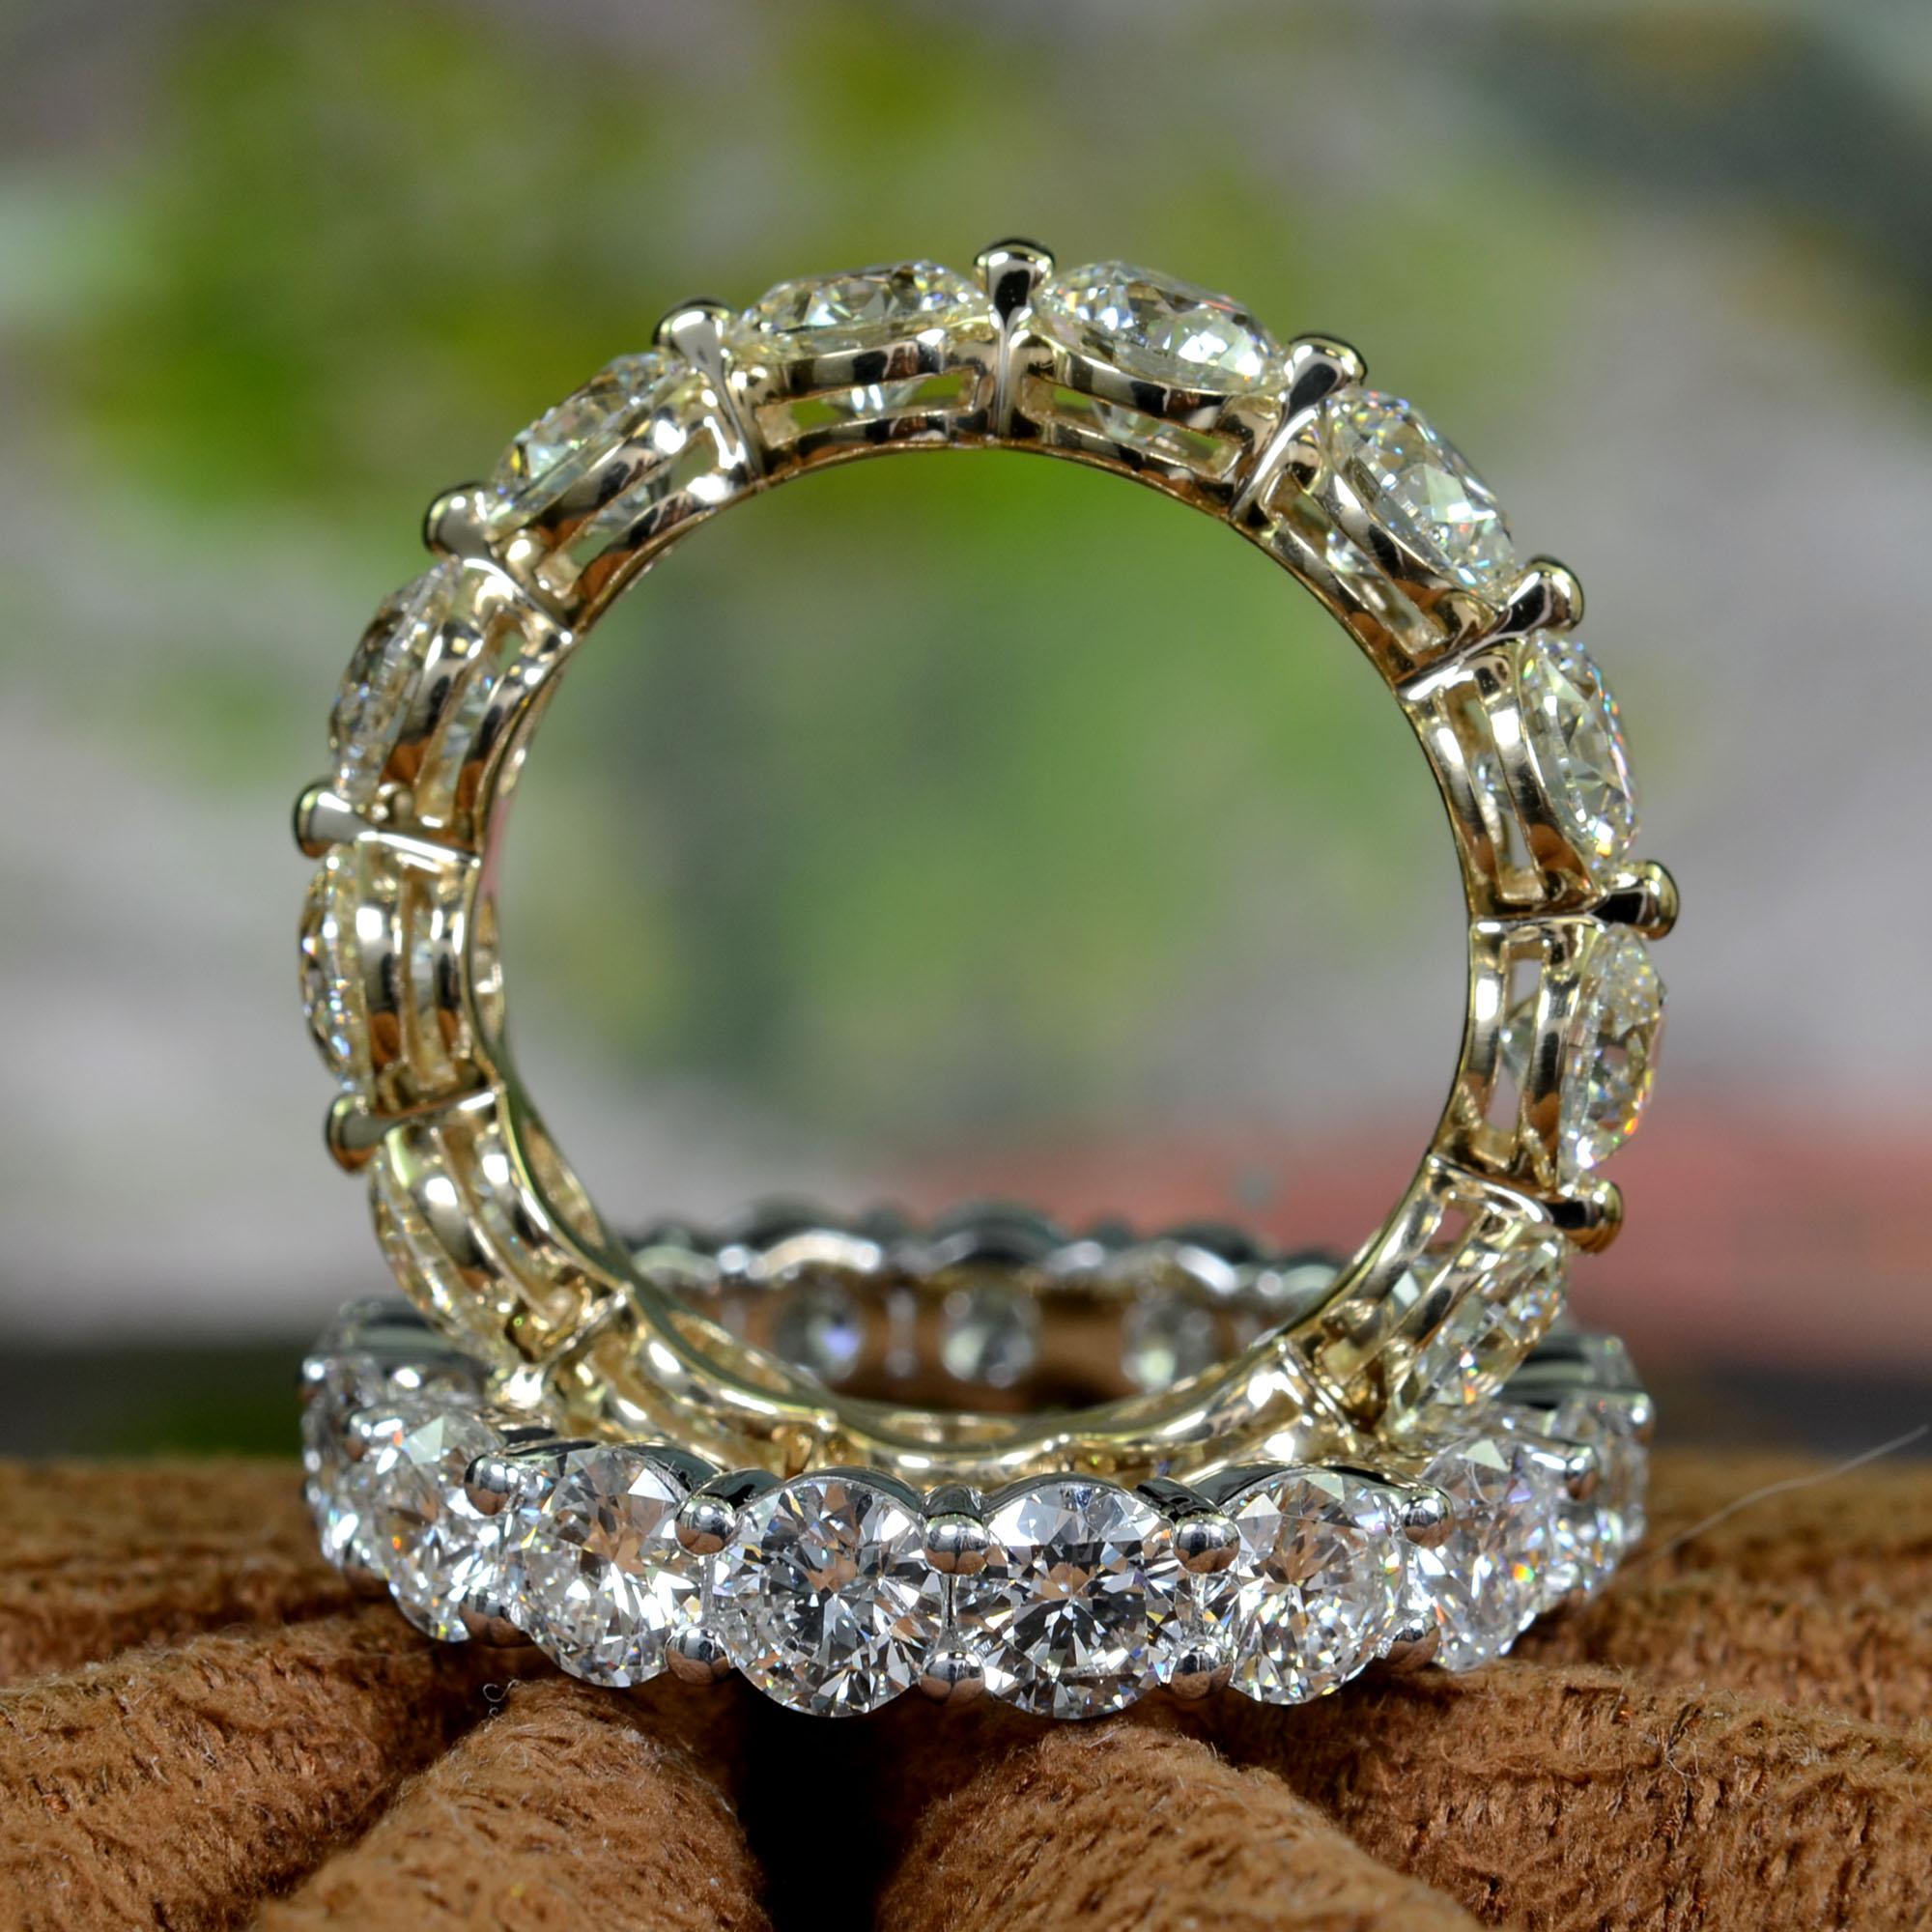 For Sale:  6 Carat Diamond Eternity Band Classic Round Cut G Color SI1 Clarity 18k Gold 4